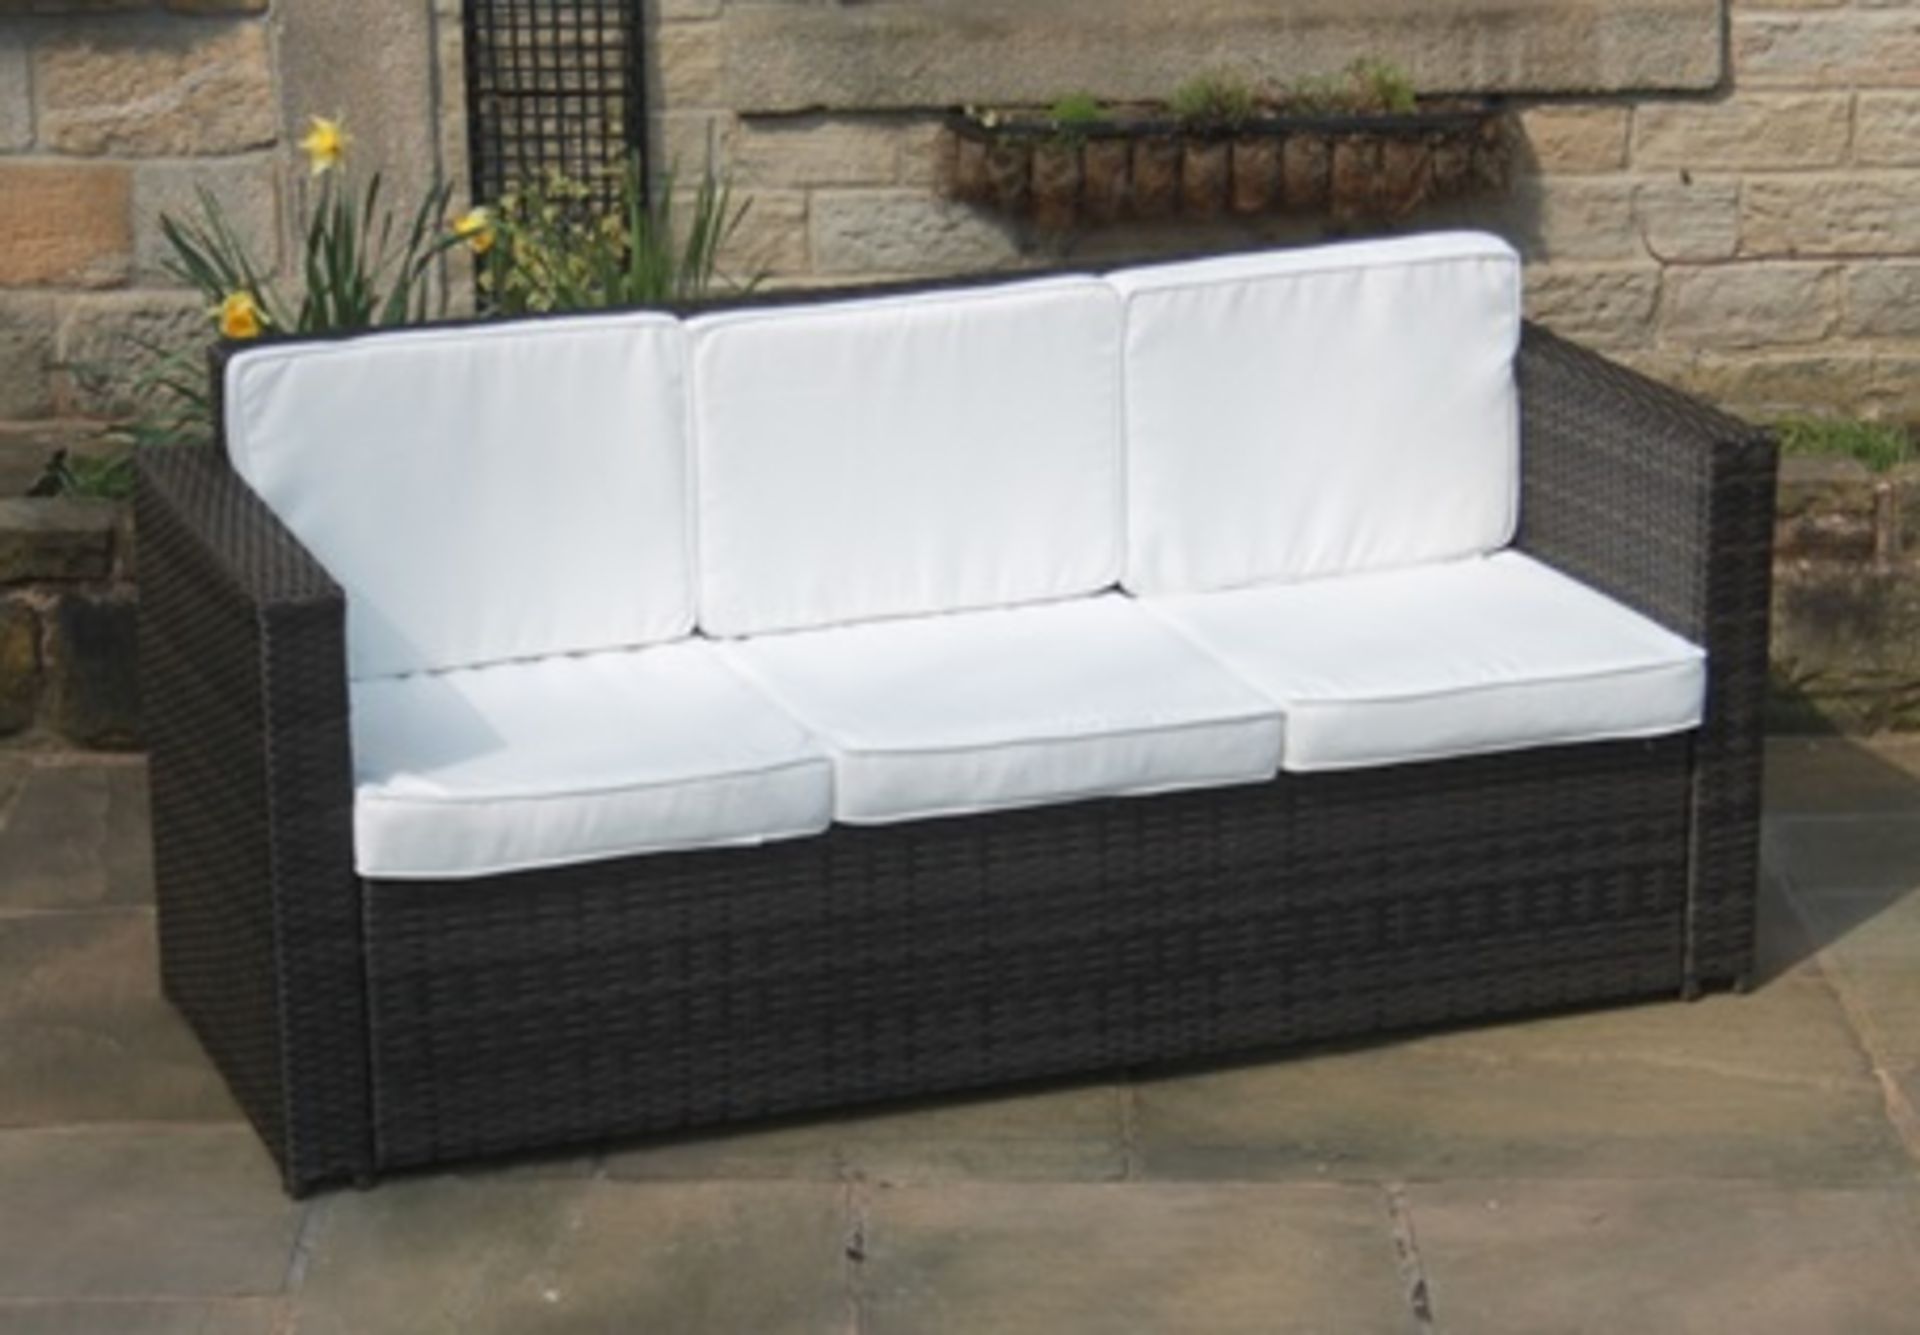 1 BRAND NEW BOXED ALL WEATHER BROWN RATTAN 3 SEATER SOFA WITH CREAM CUSHIONS STLRBRN/BLK